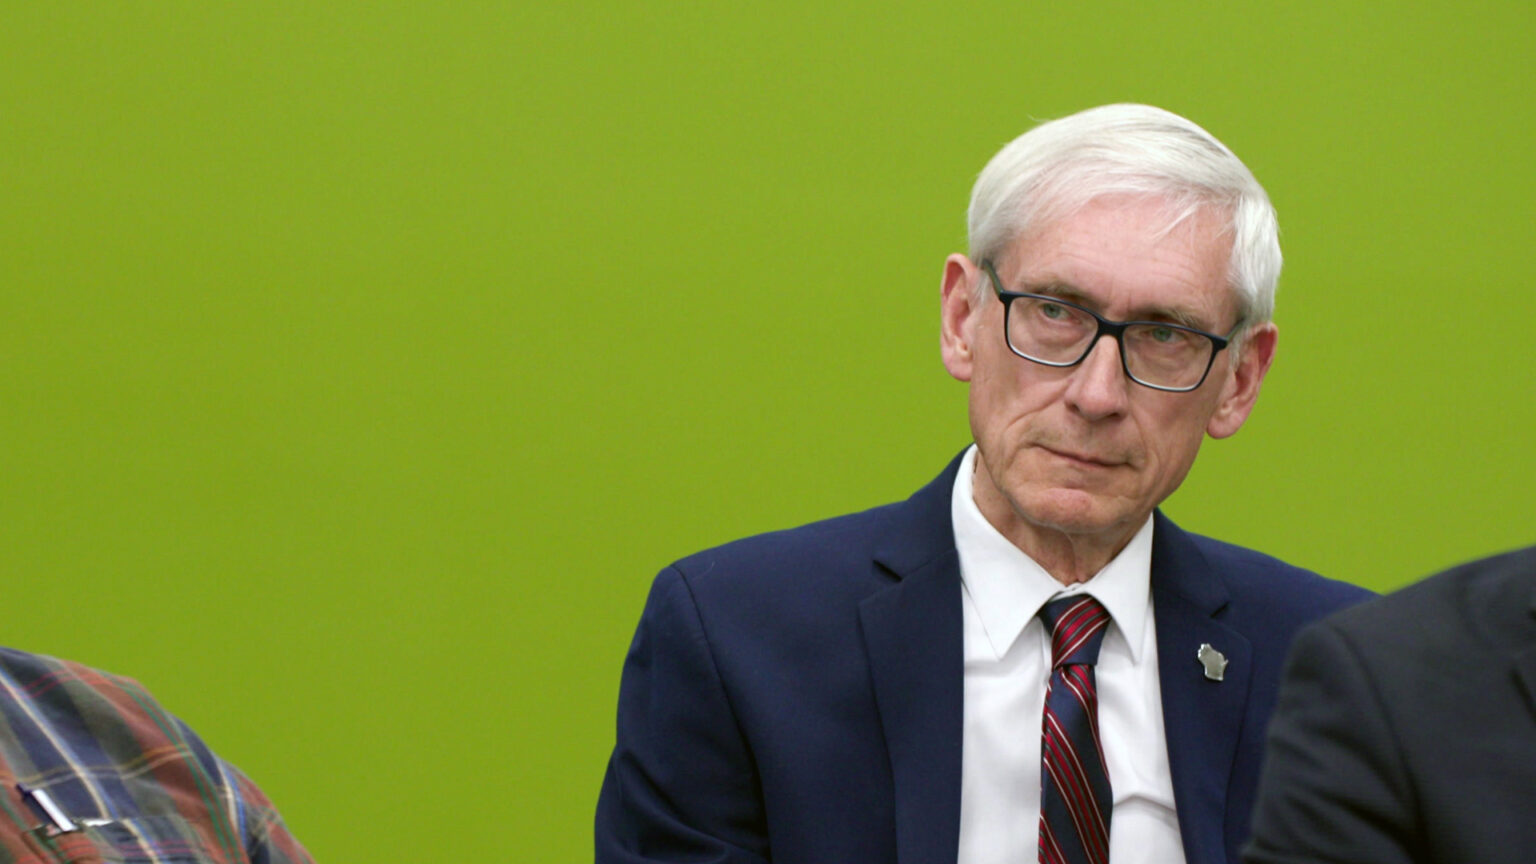 Tony Evers sits and listens, with two other people sitting in front of him.